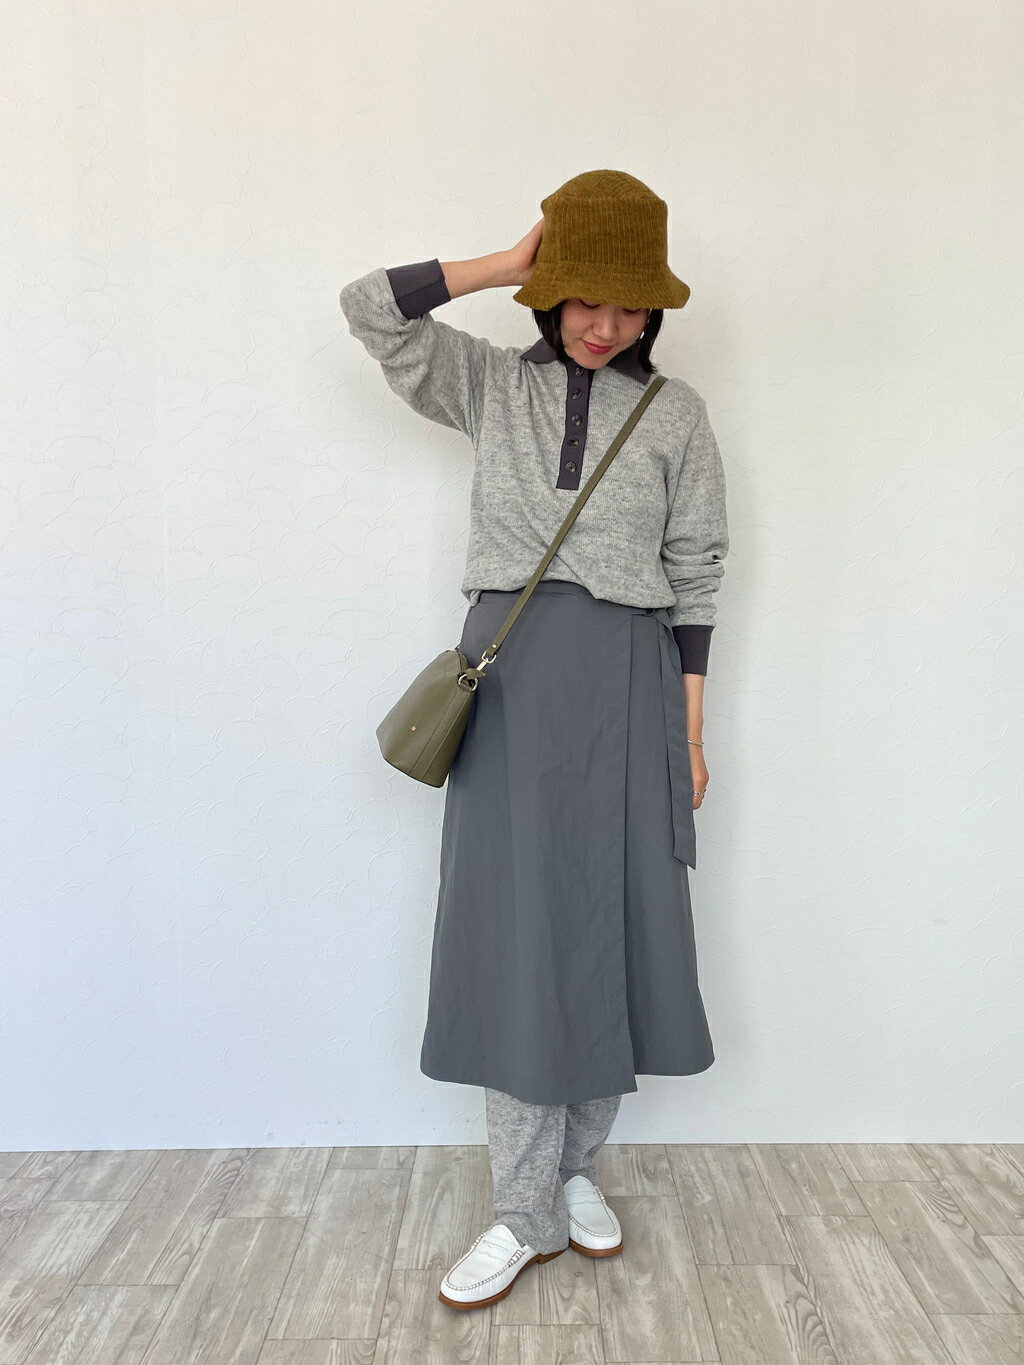 Thermal Knit Like a Used リブポロシャツ-